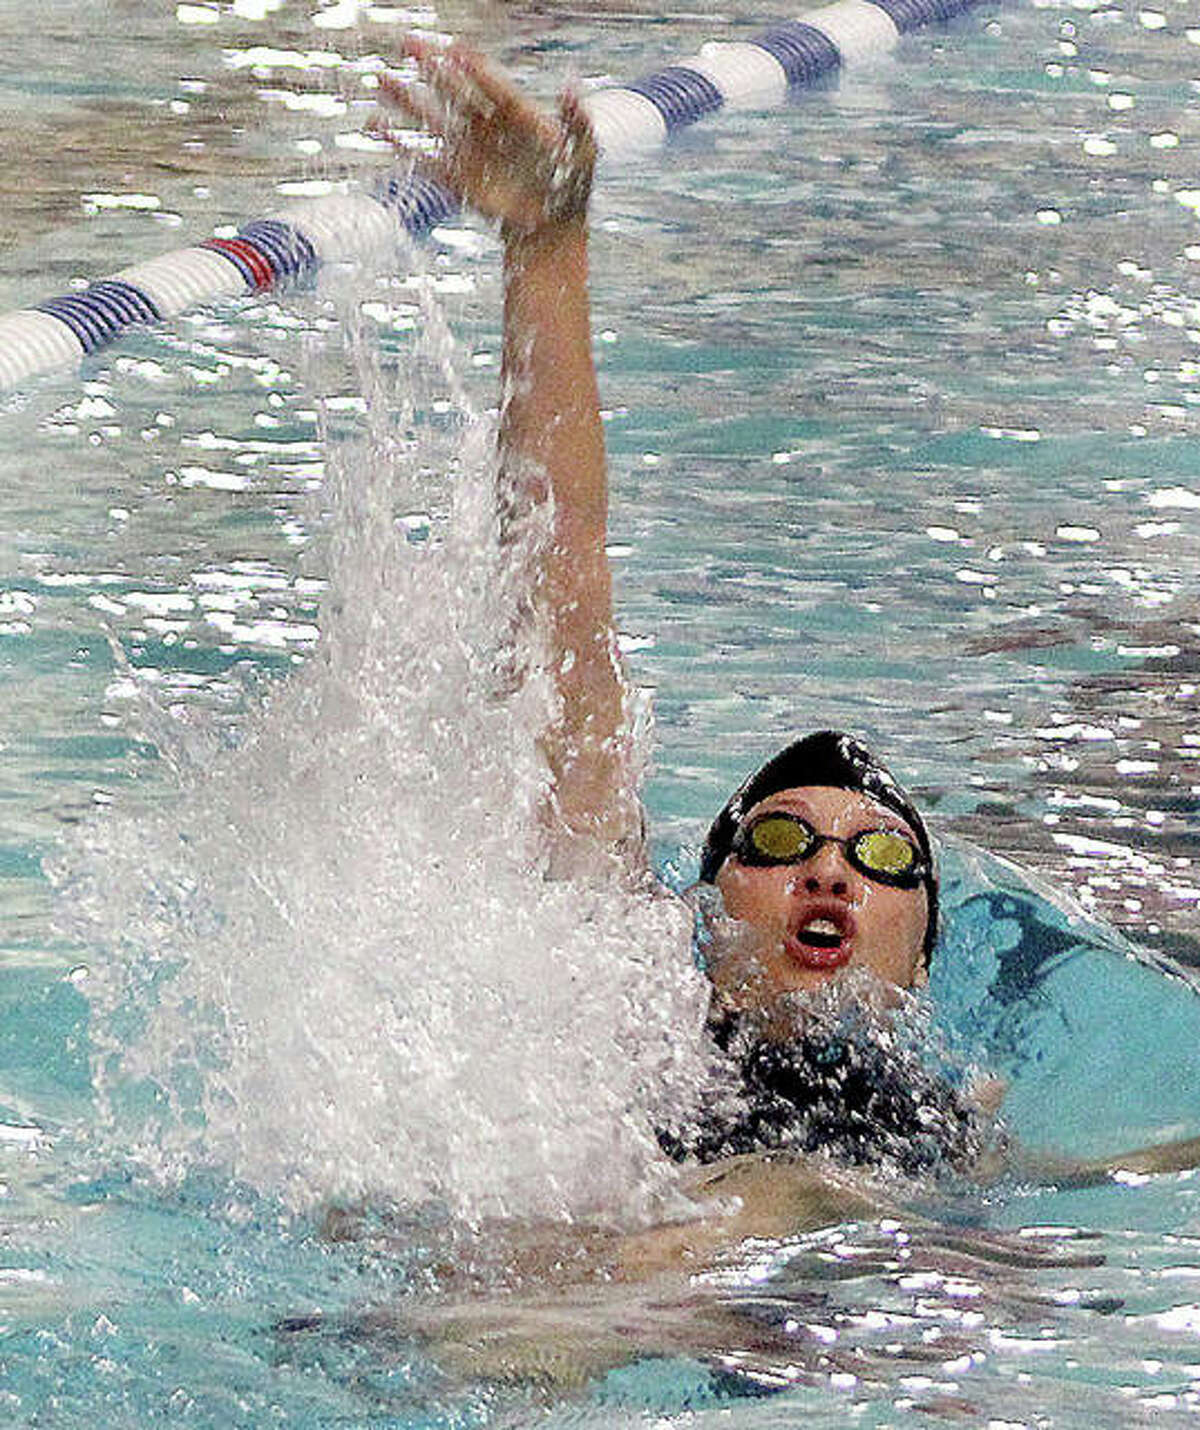 Edwardsville’s Phoebe Gremaud won the 100-yard backstroke at last week’s sringfild sectional and will swim Friday in the prelims at the IHSA Girls State swim Meet in Winnetka at New Trier High School..